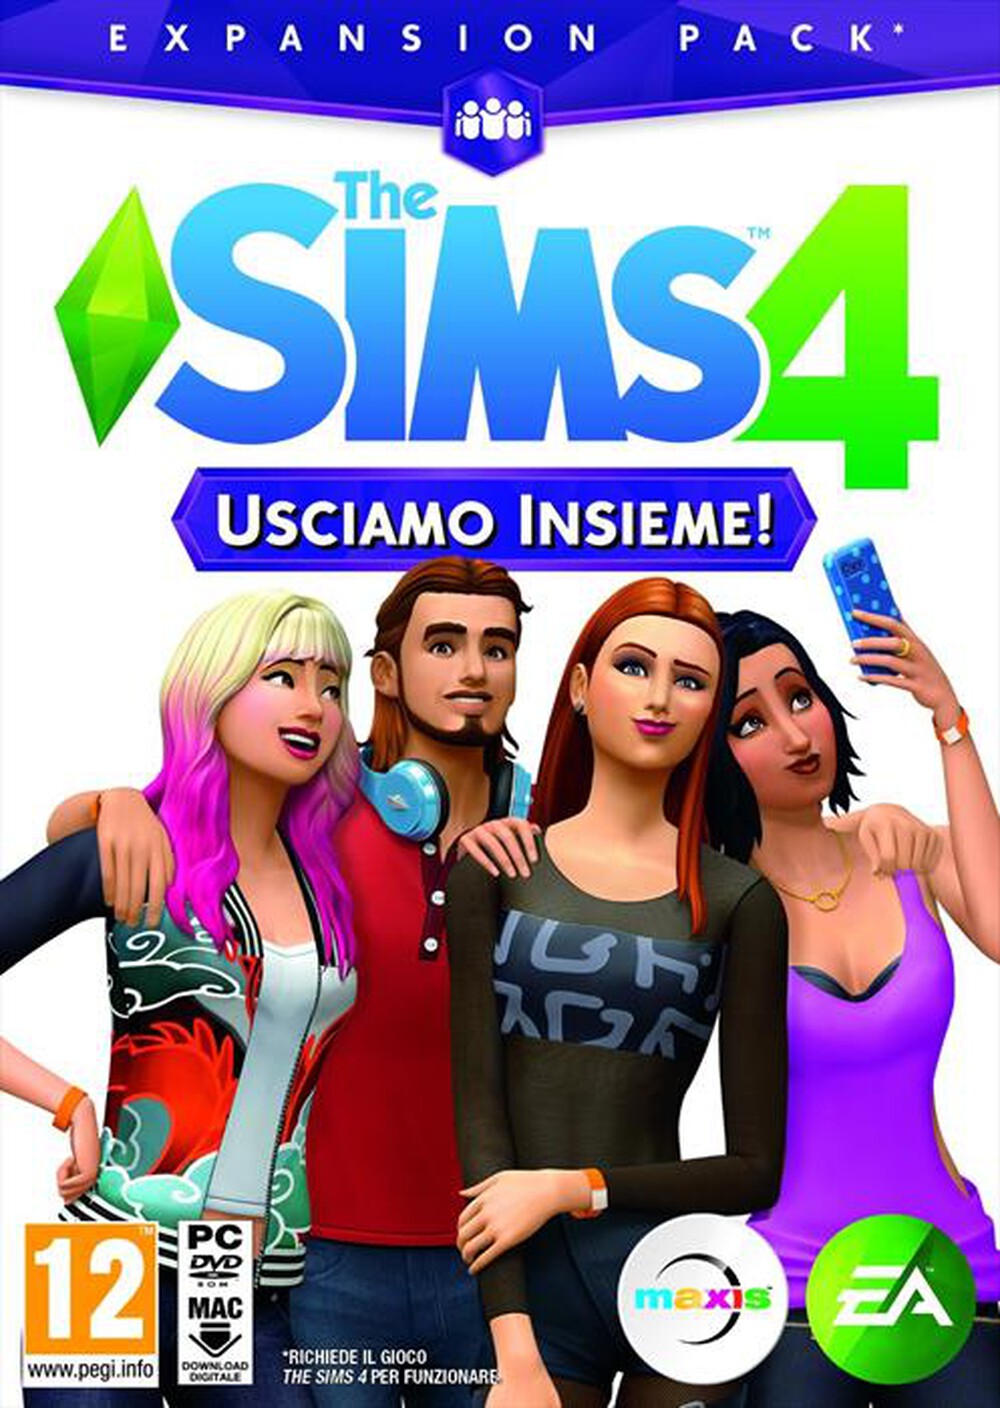 "ELECTRONIC ARTS - The Sims 4 Get Together PC Espansione - "